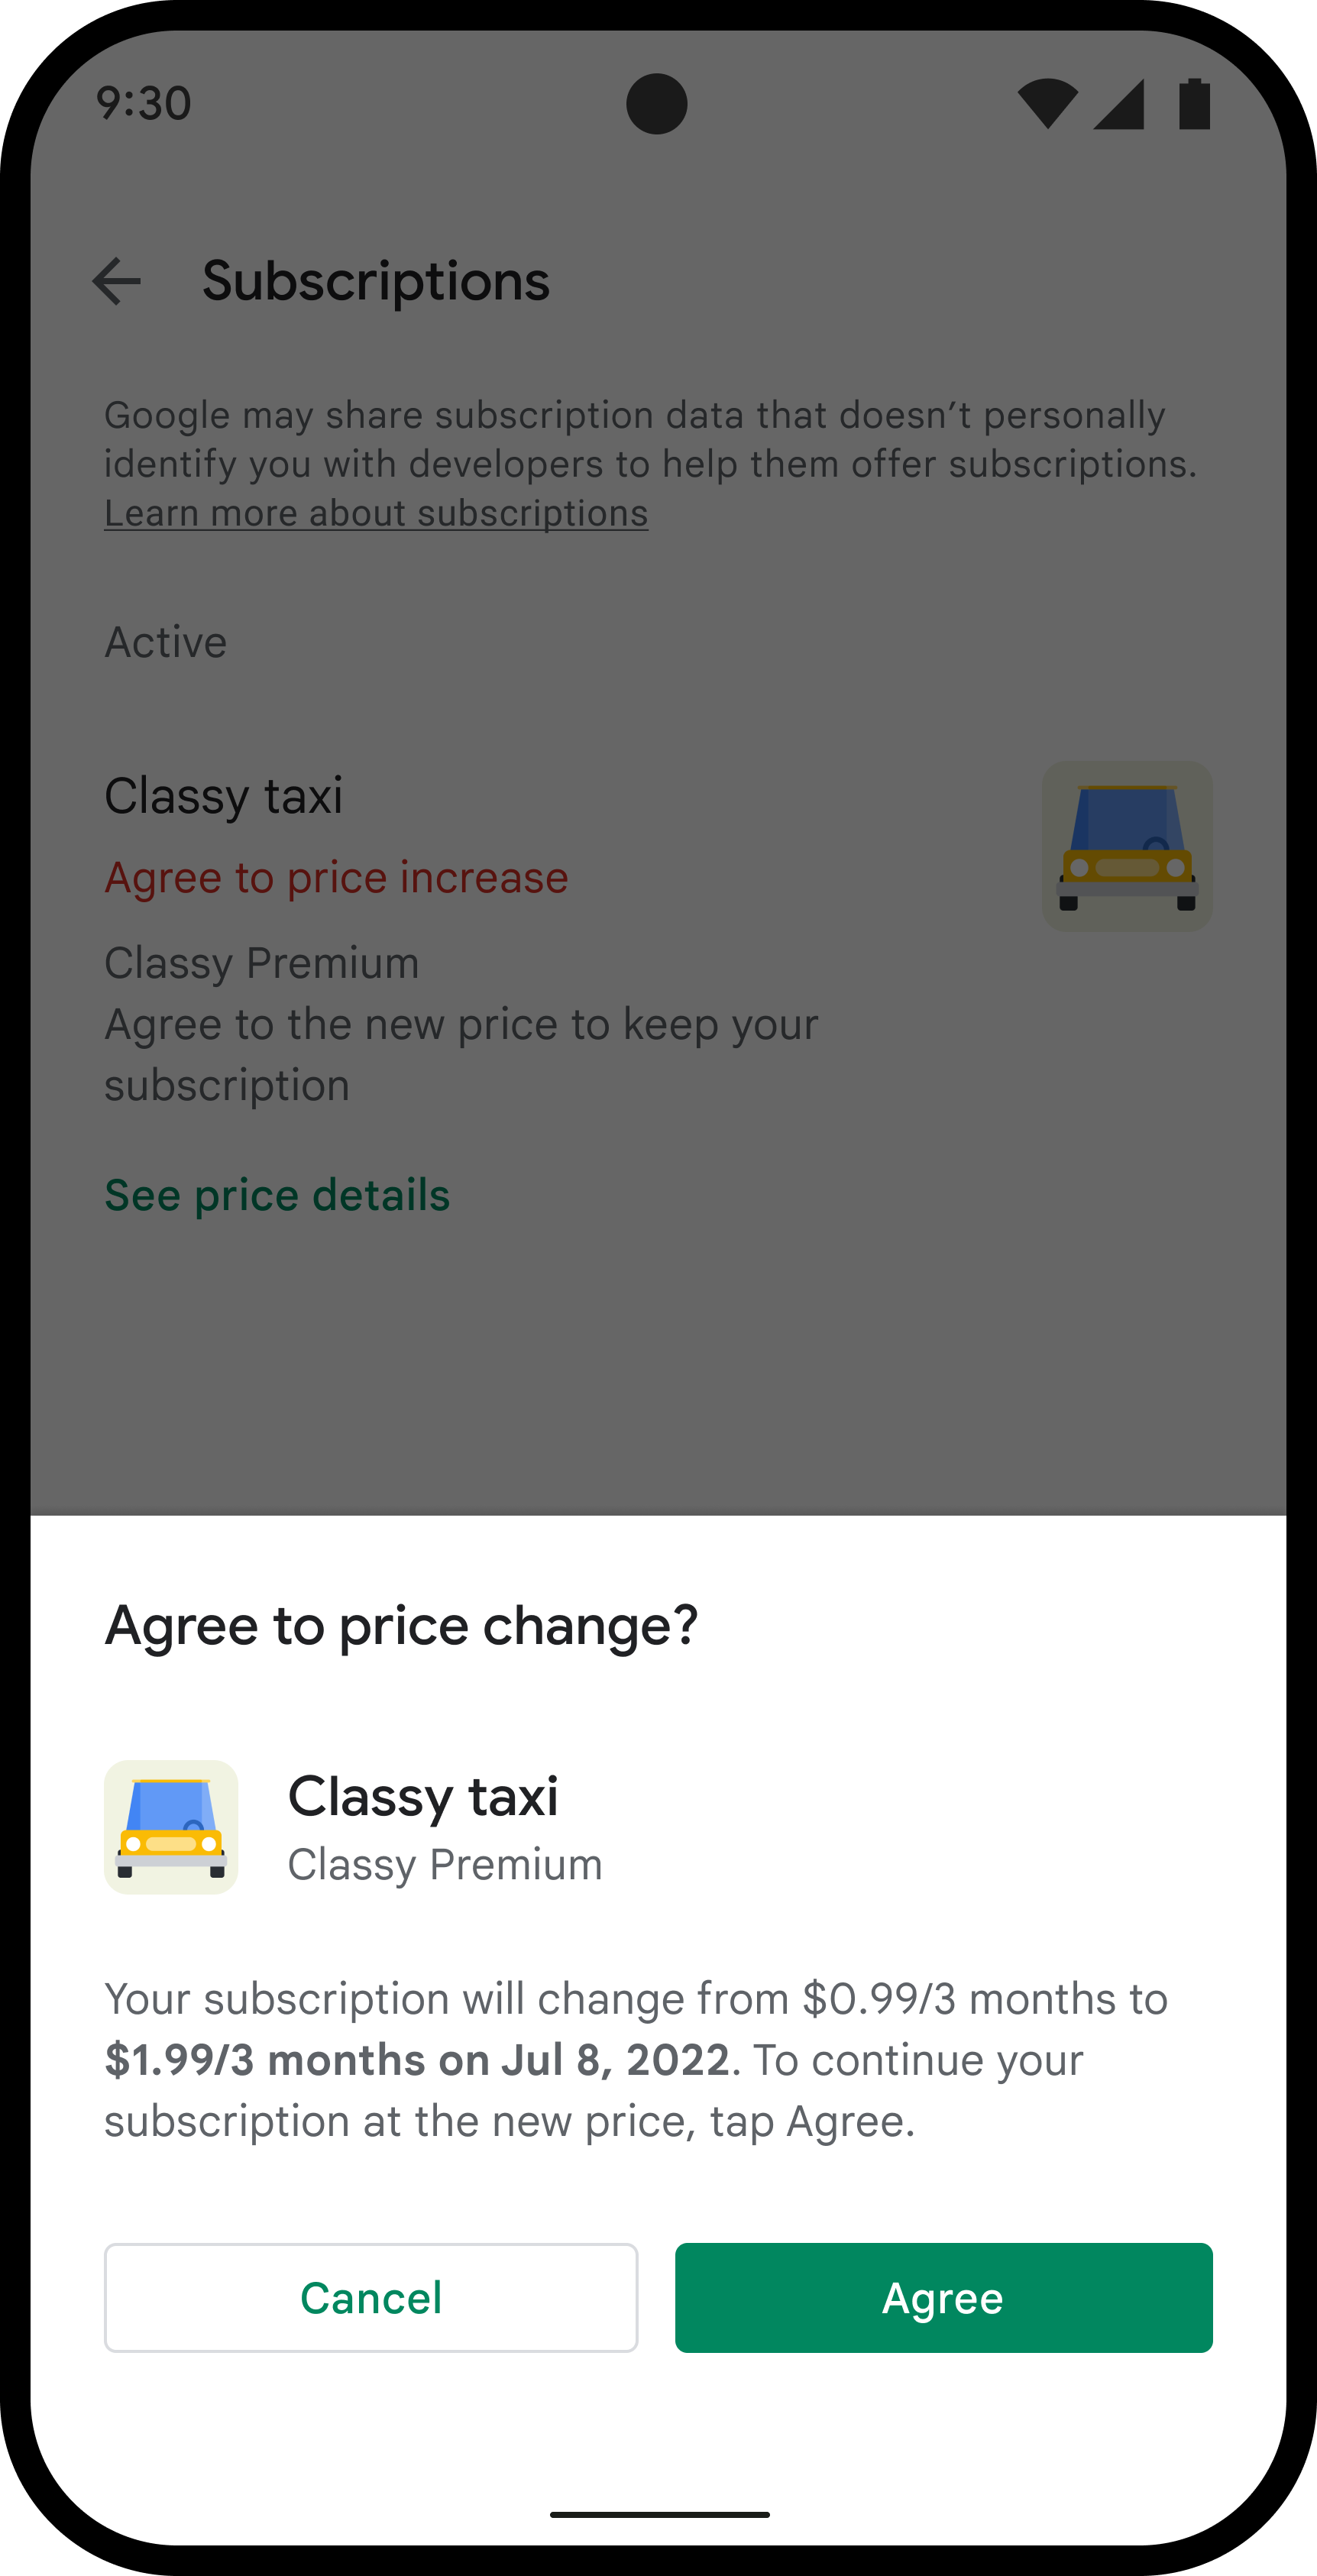 Generic dialog notifying the user of a subscription price change